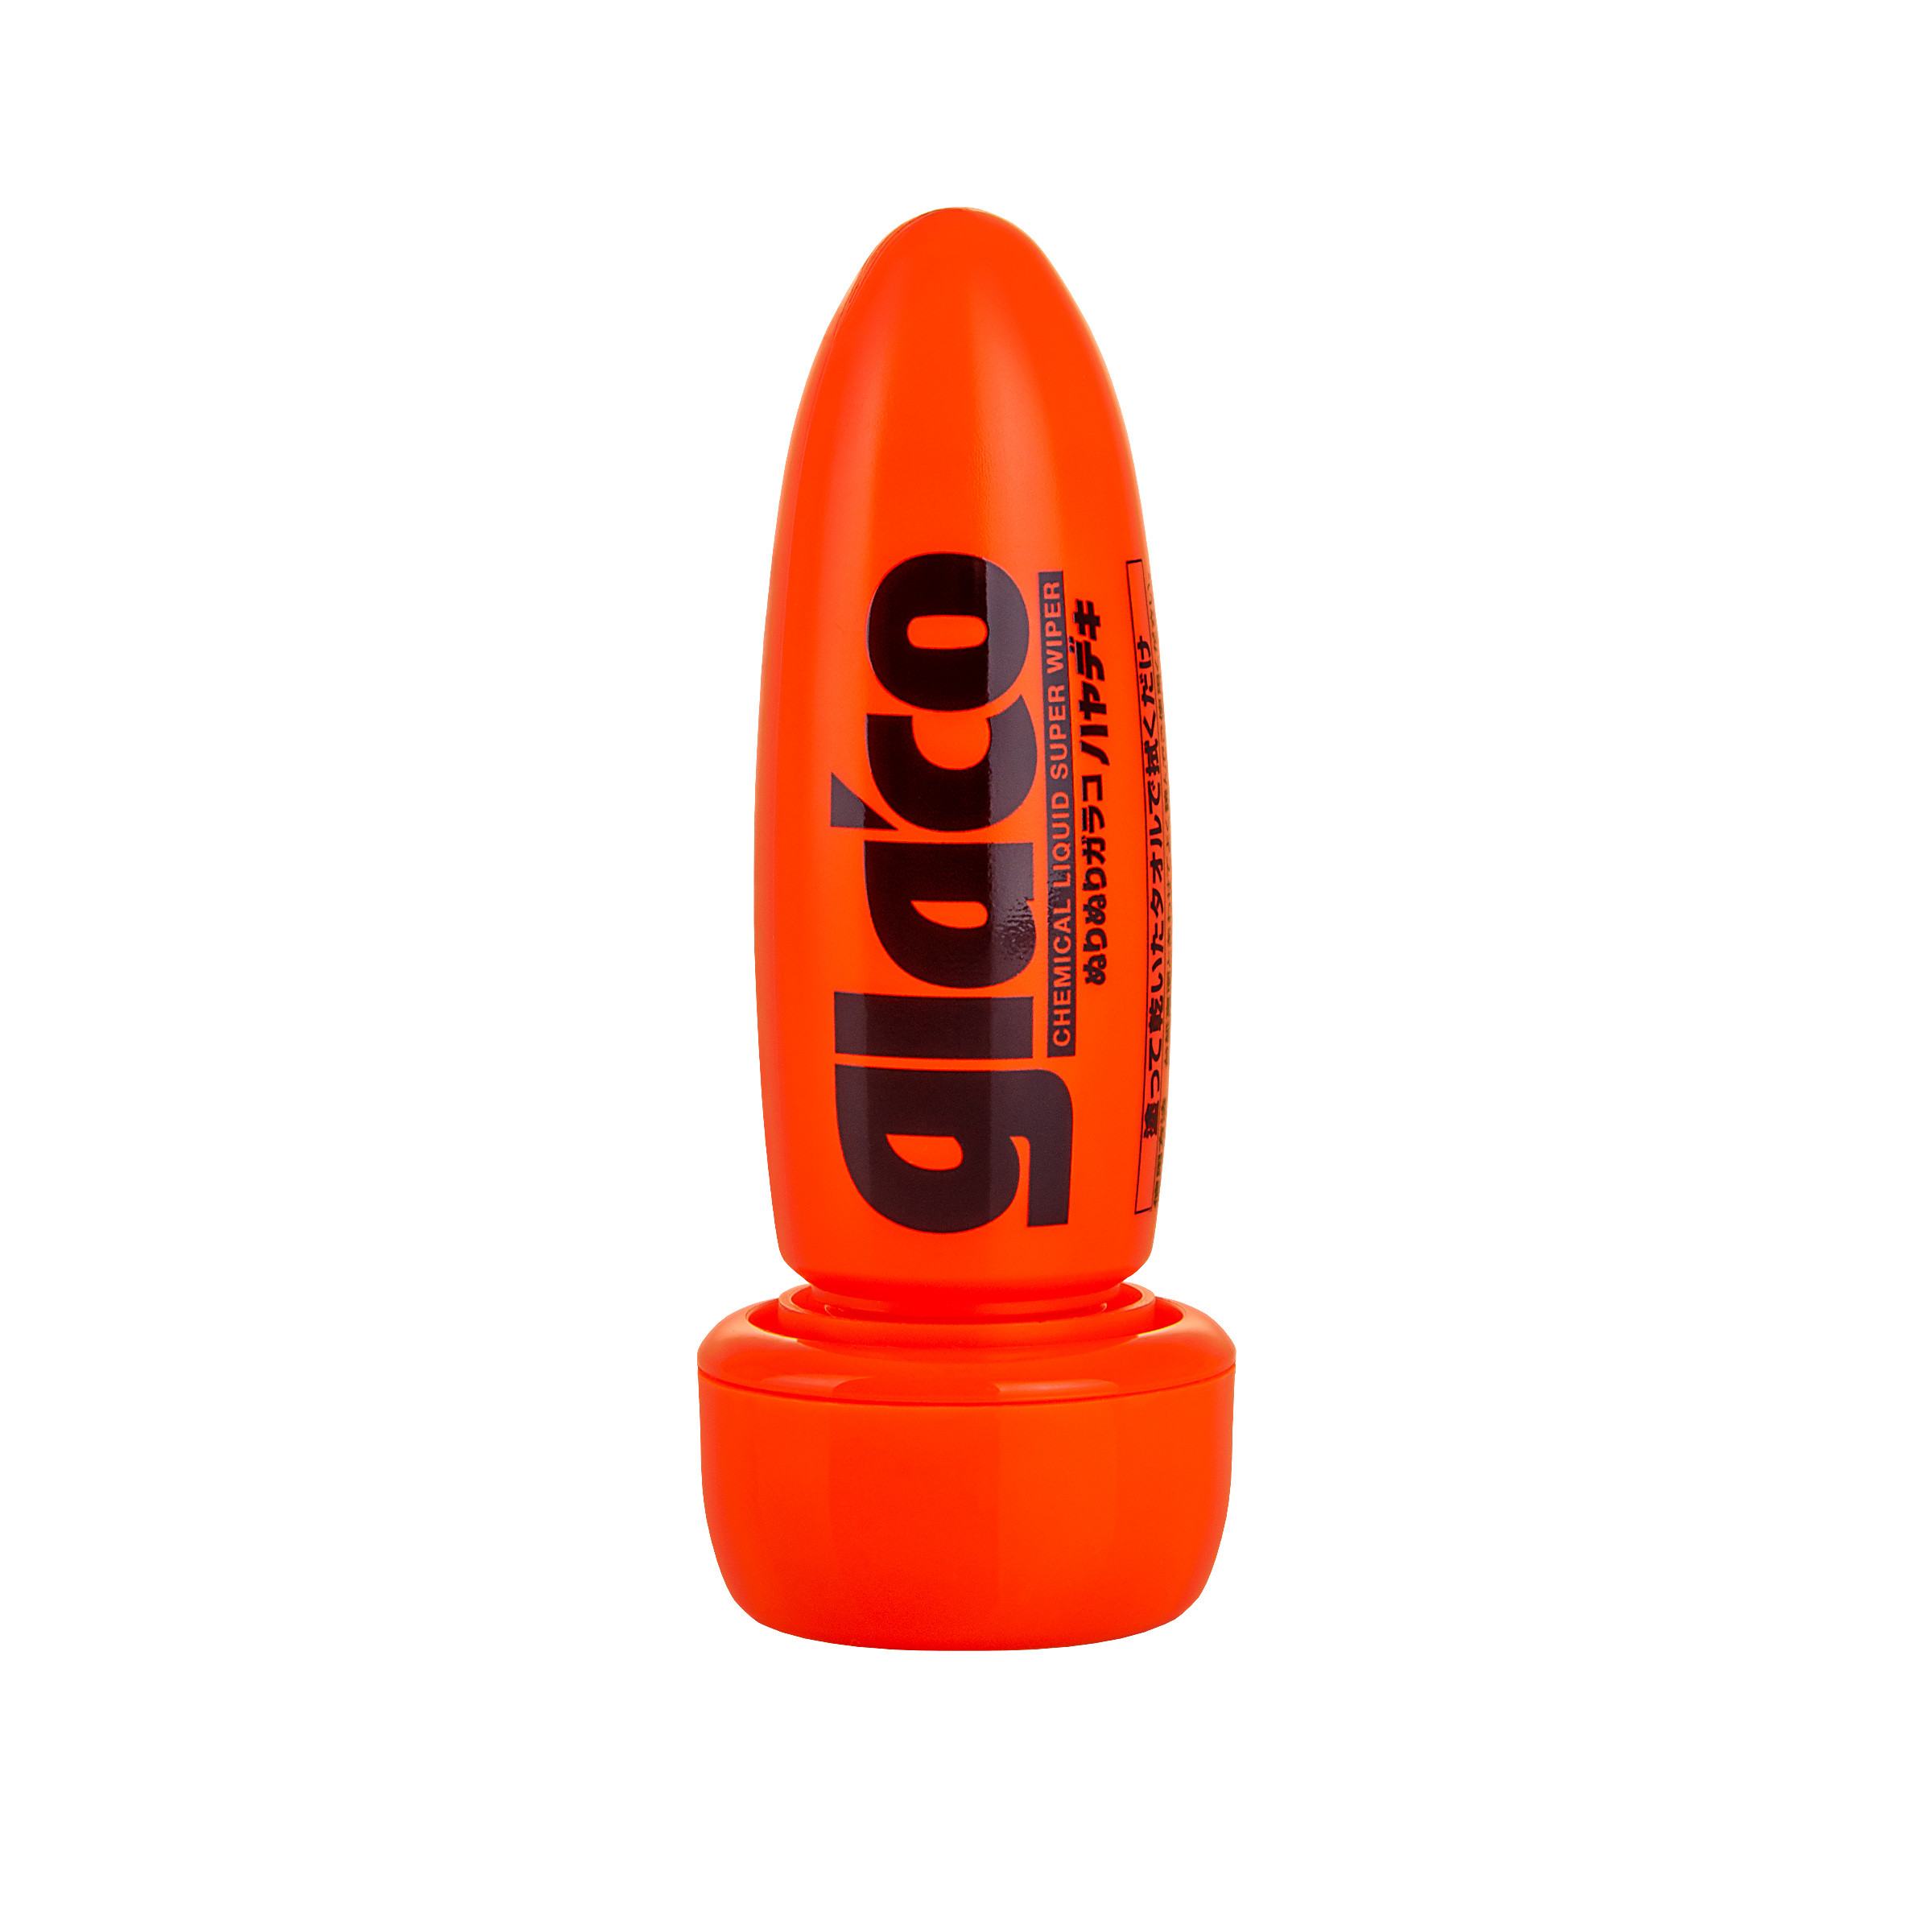 Glaco Roll On Instant Dry (product unavailable in your region)